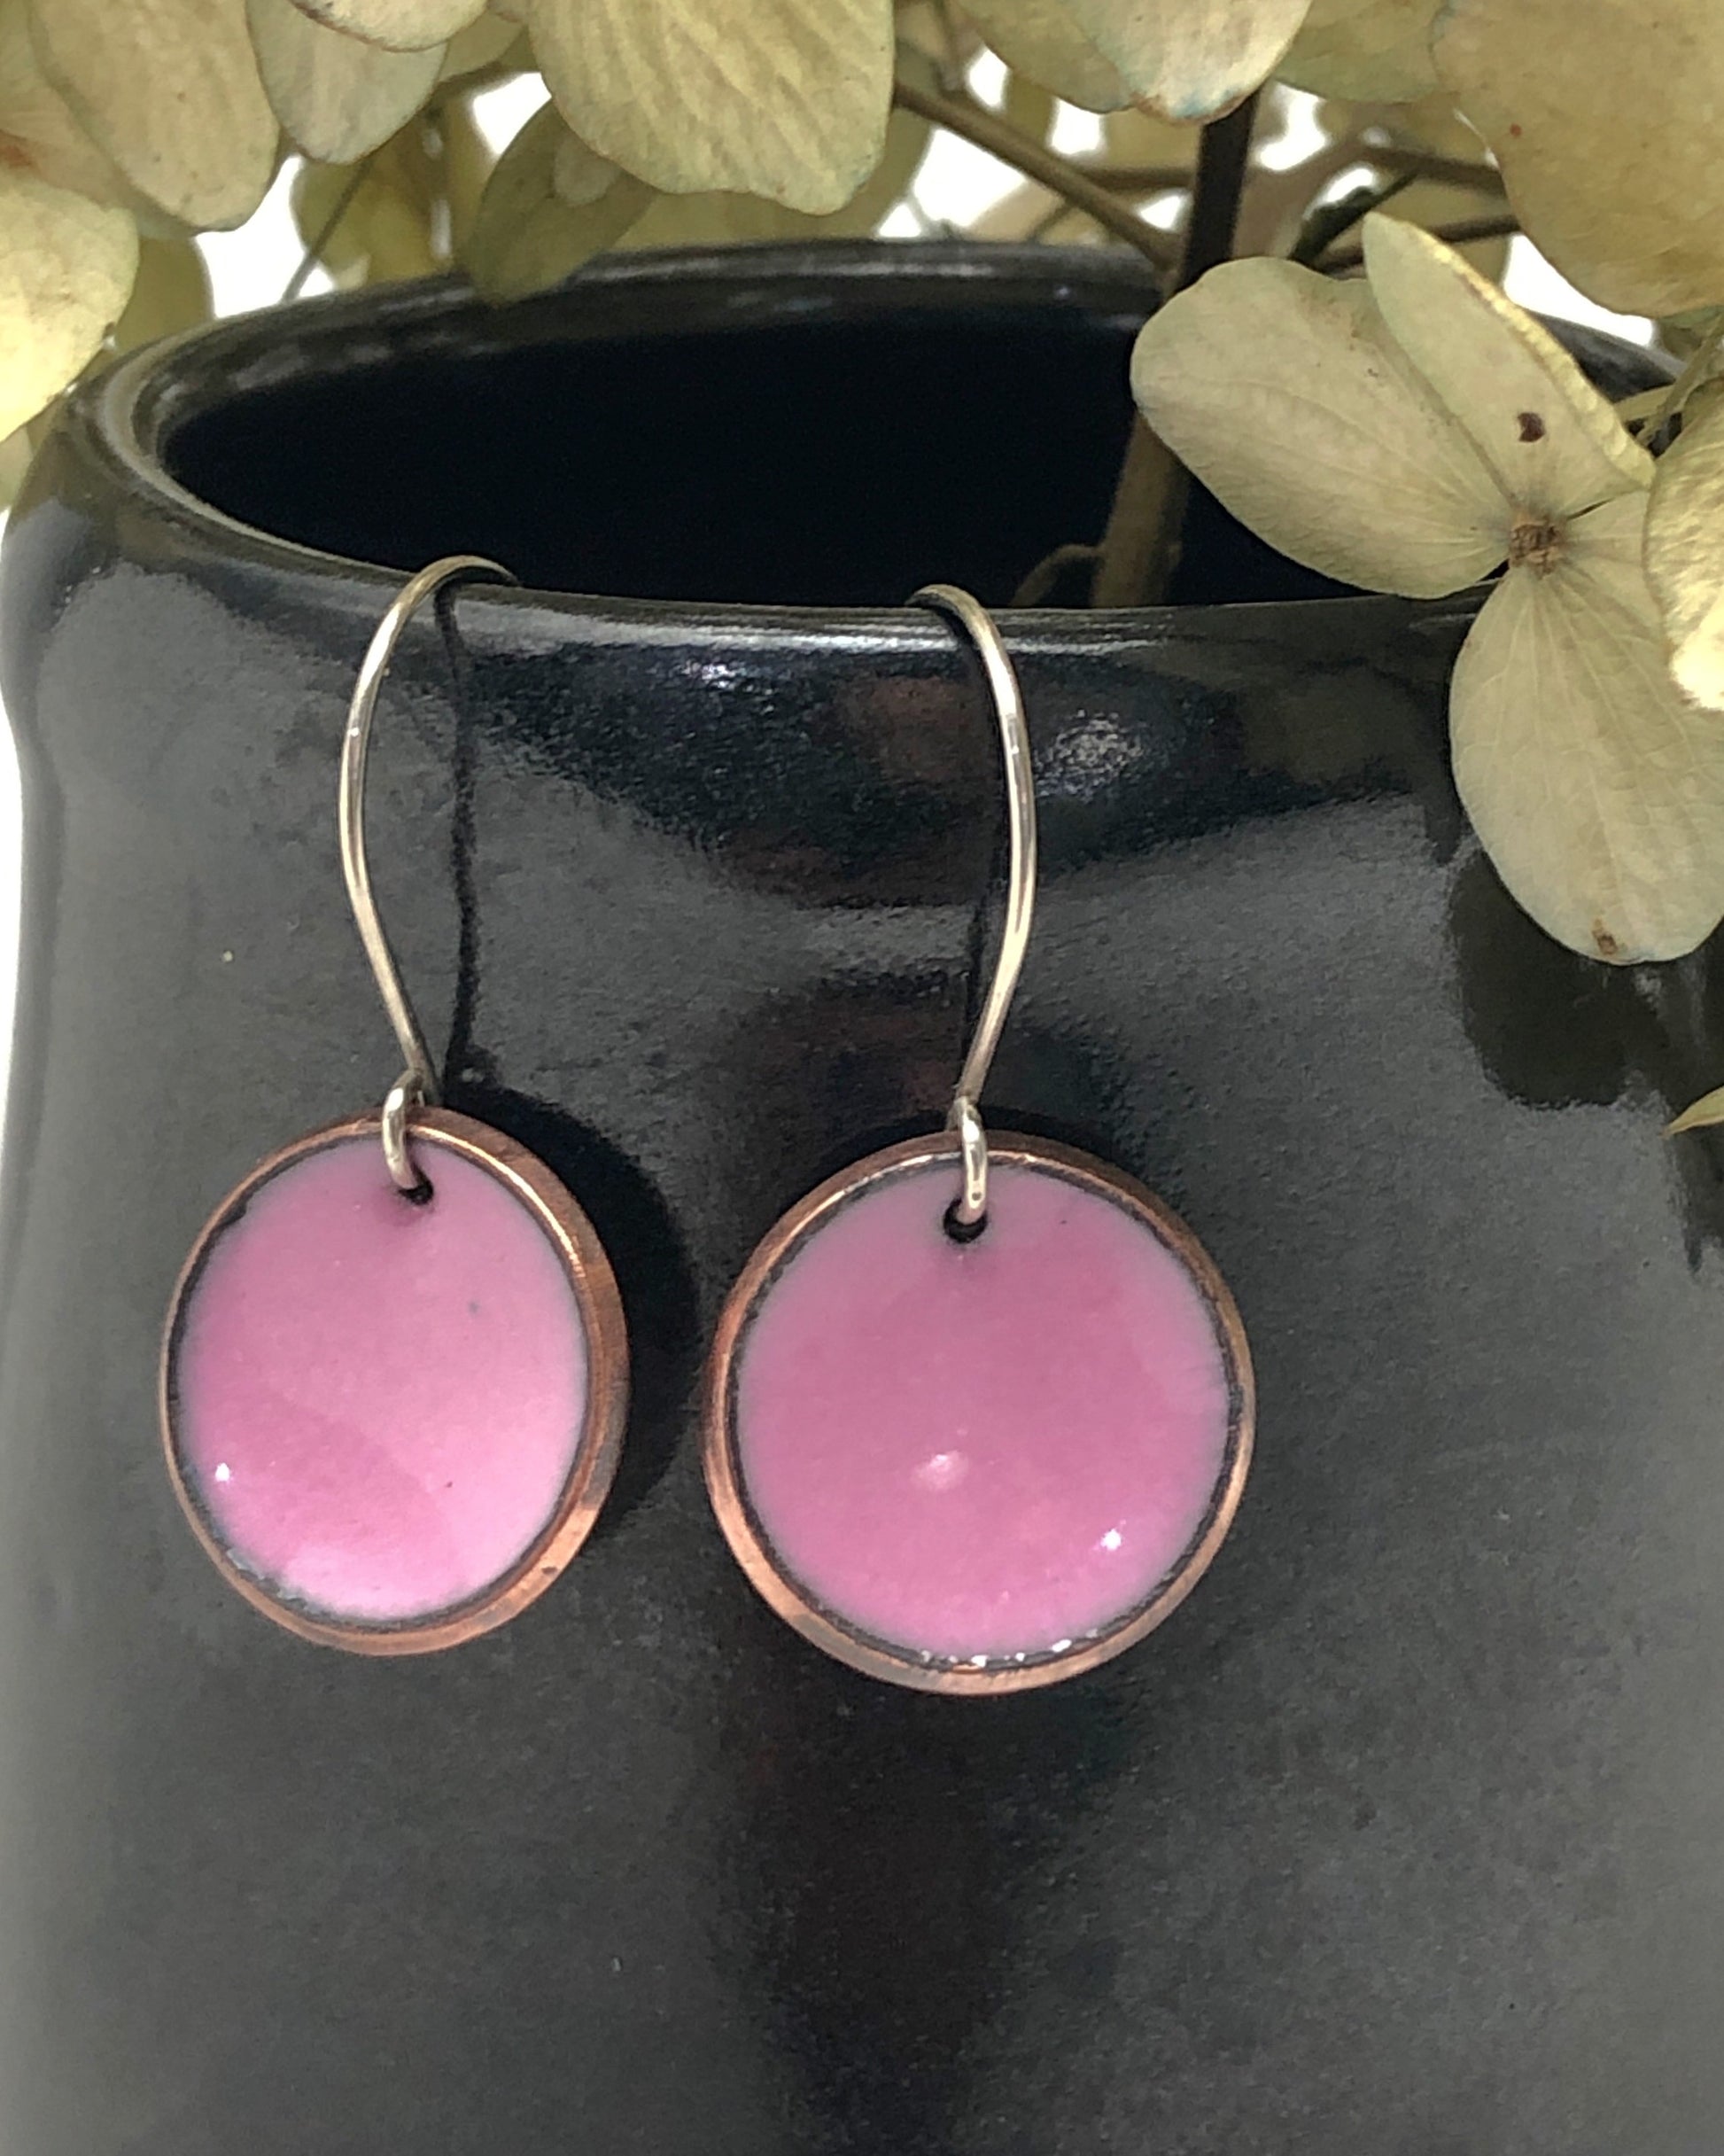 a close up of a pair of pink earrings